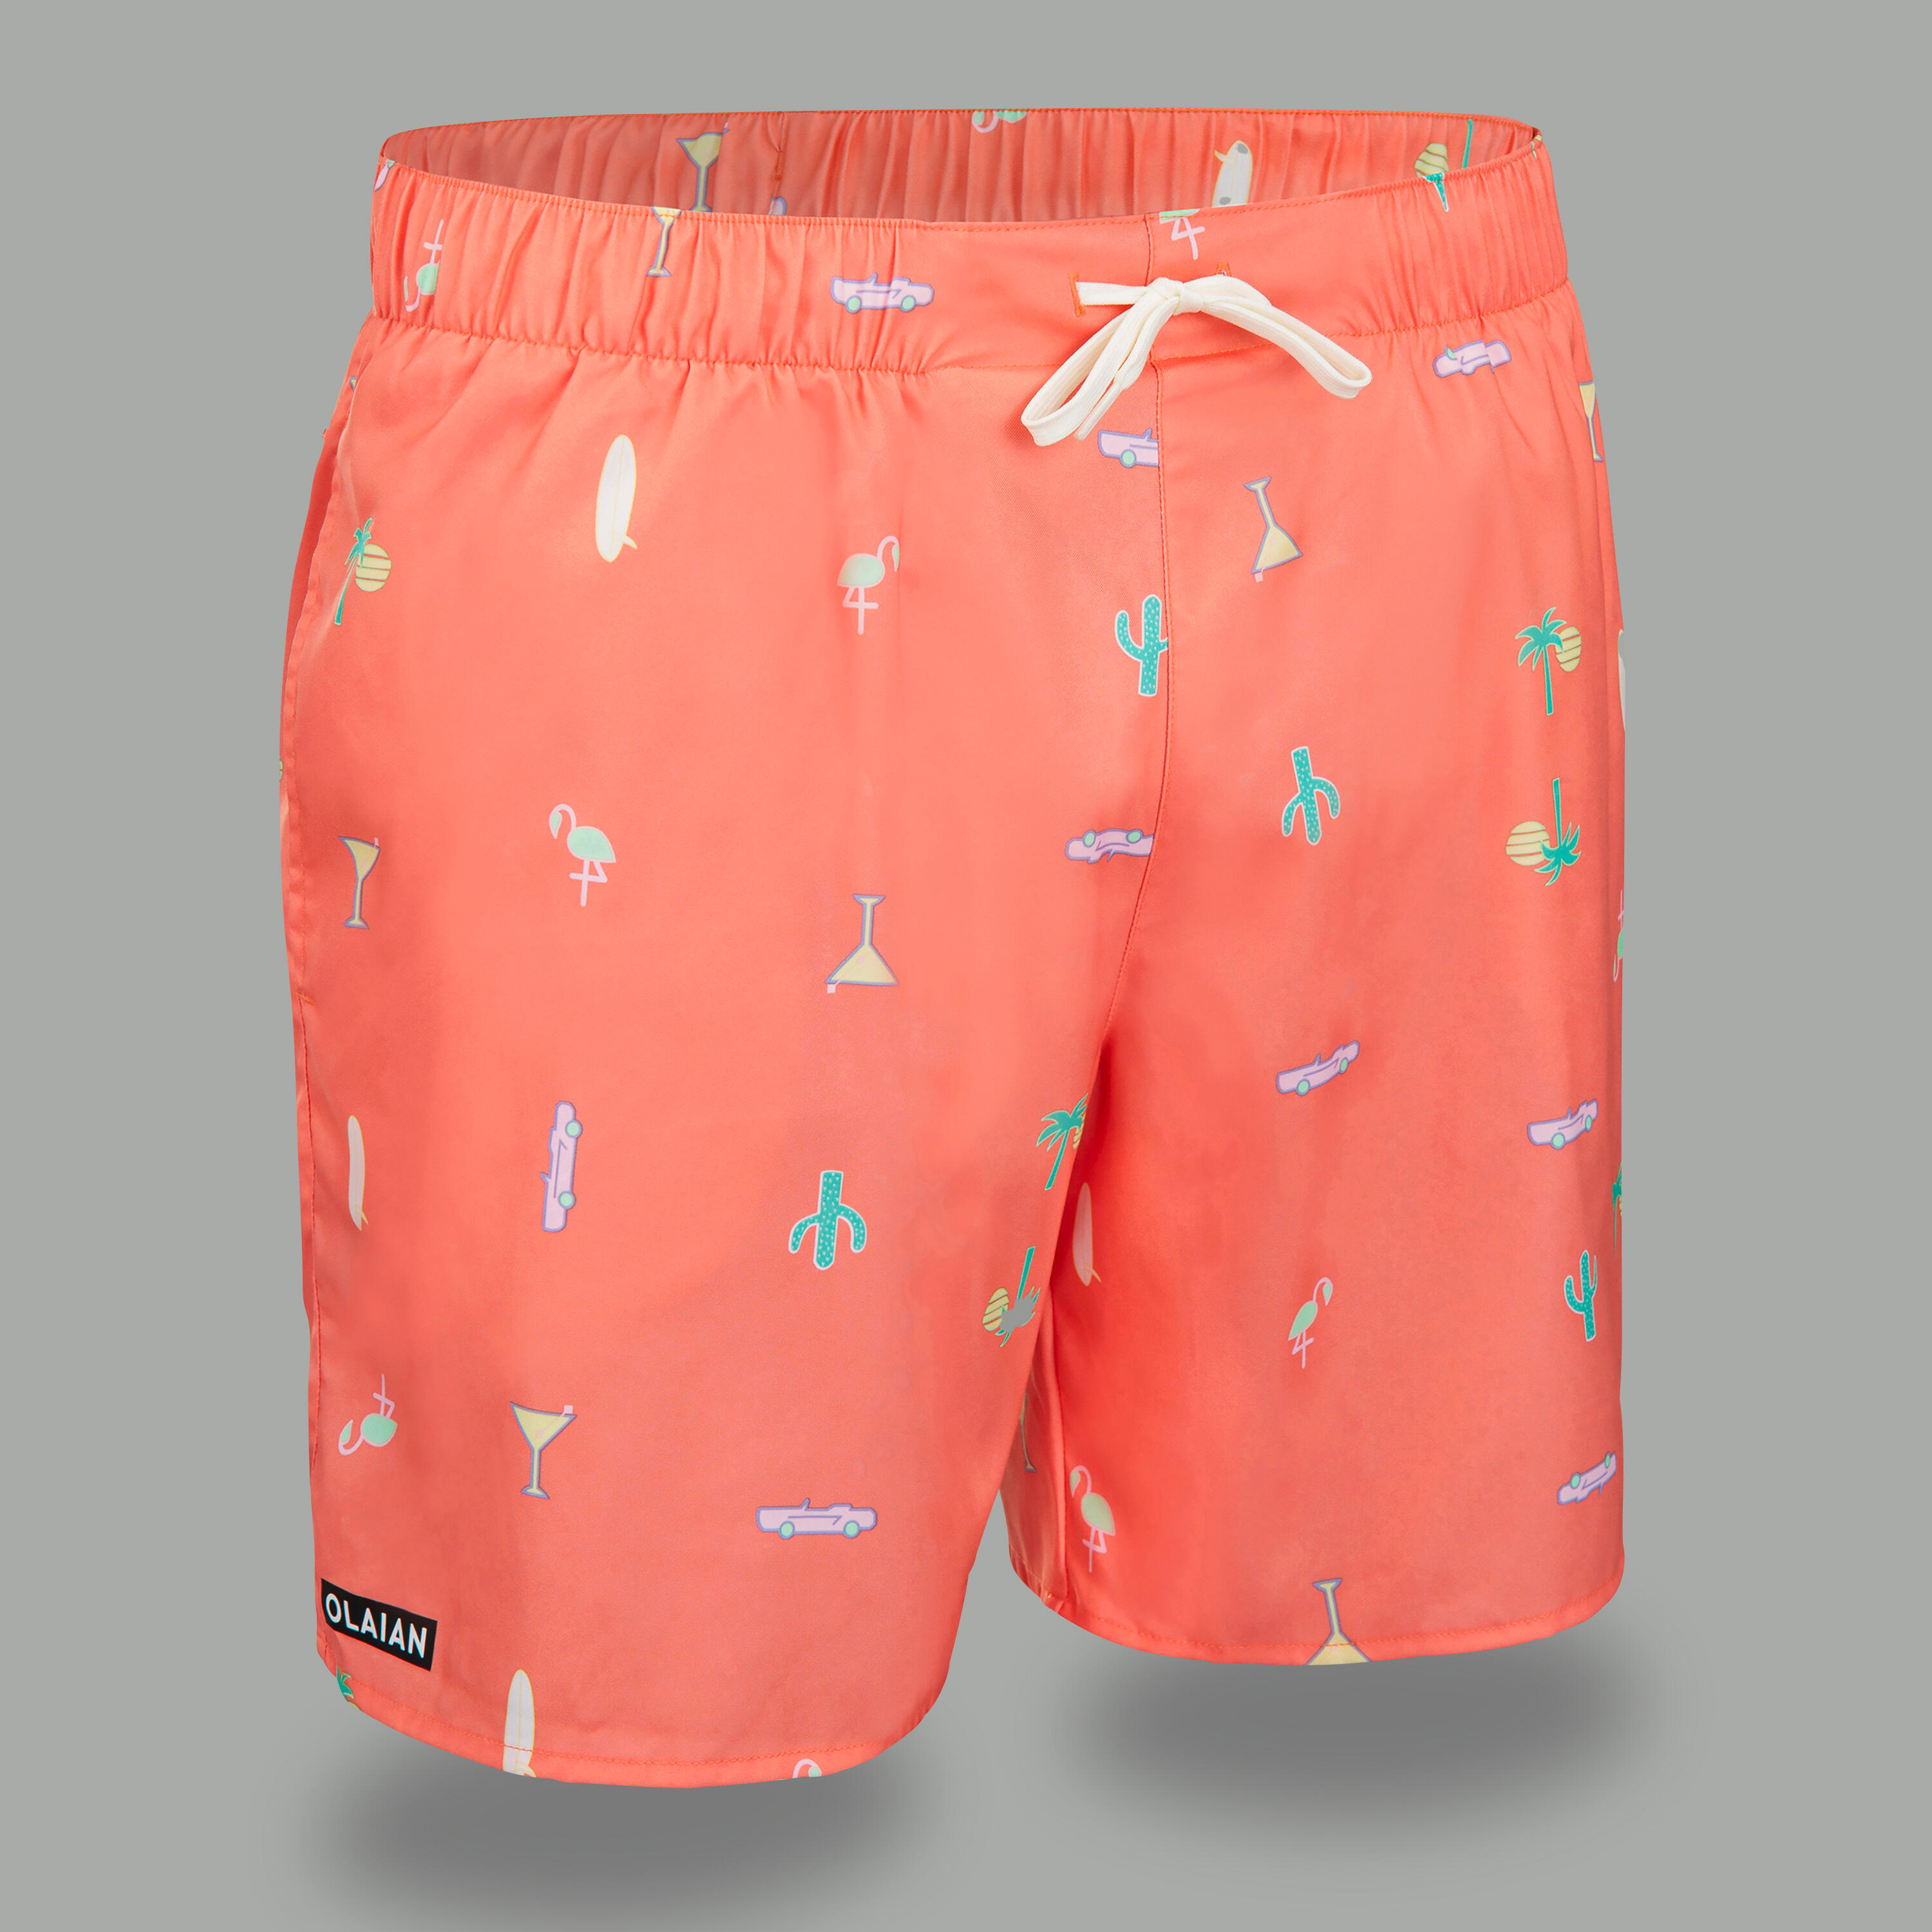 OLAIAN Surfing Standard Boardshorts 100 - COSMIC CORAL